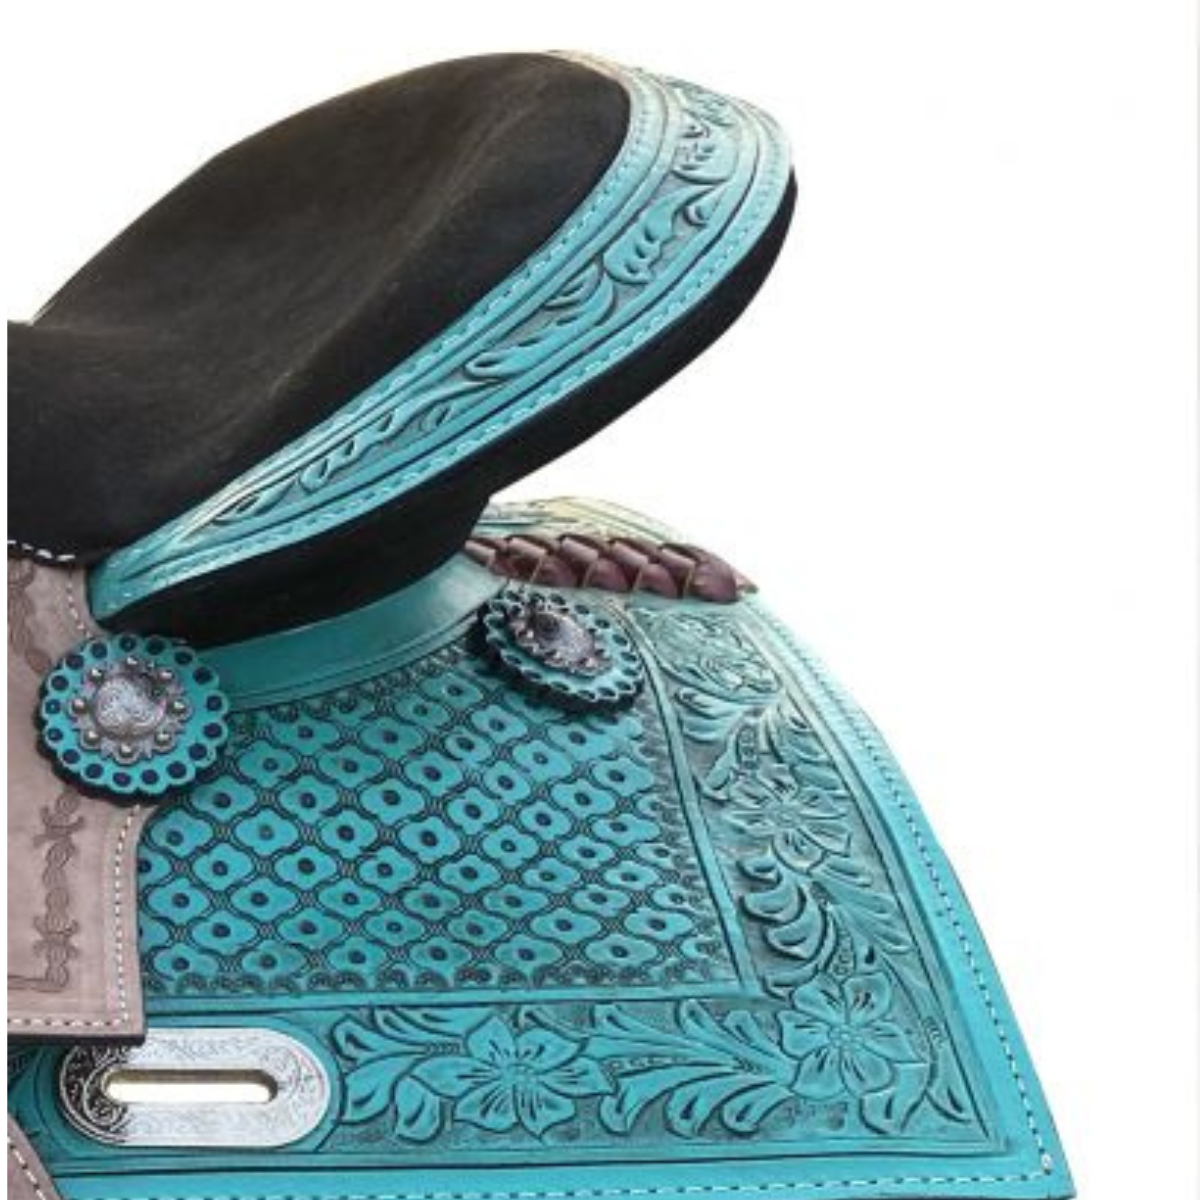 13" DOUBLE T TEAL PONY/YOUTH SADDLE WITH ROUGH OUT ACCENTS - Double T Saddles